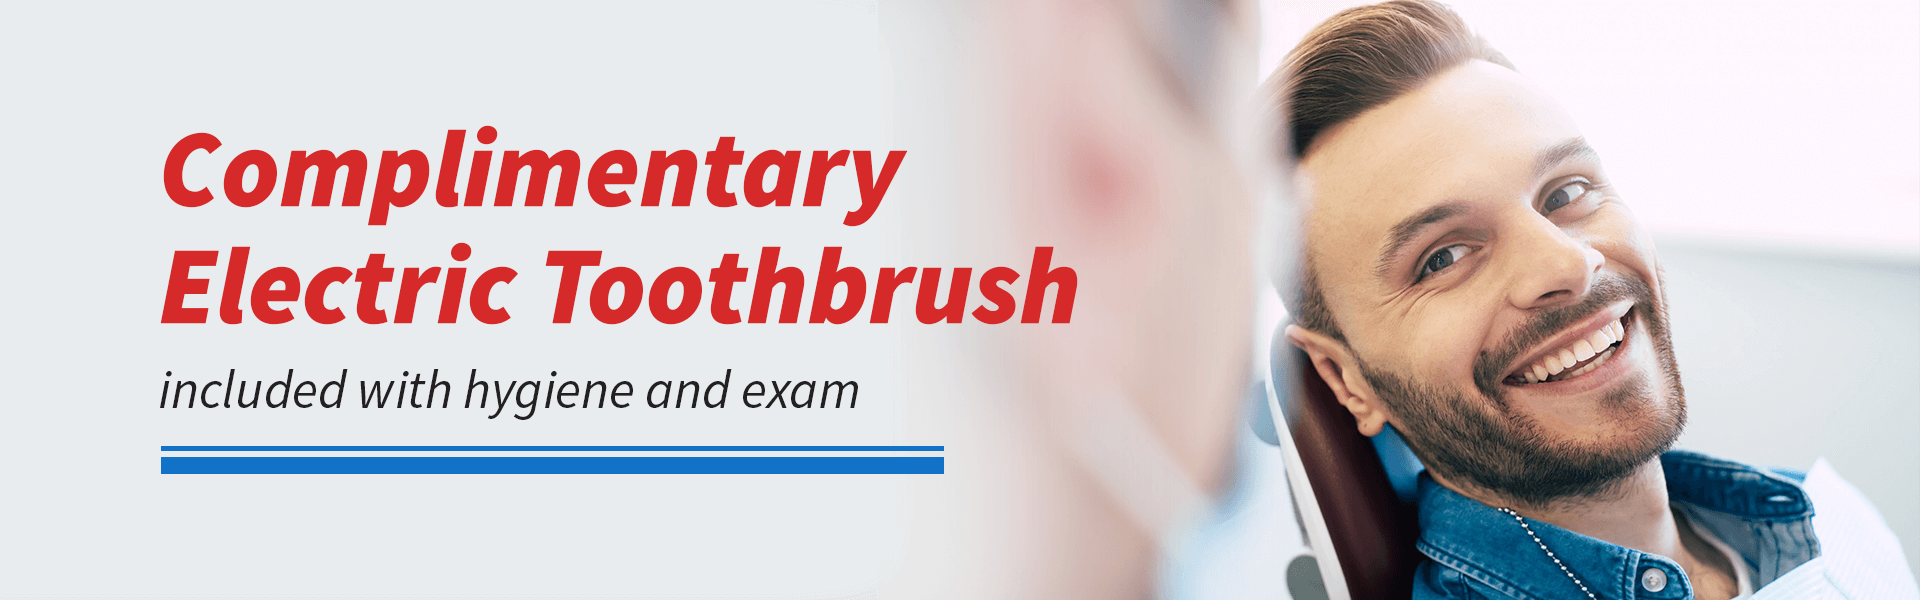 Bow River Dental offers complimentary electric toothbrush included with hygiene and exam